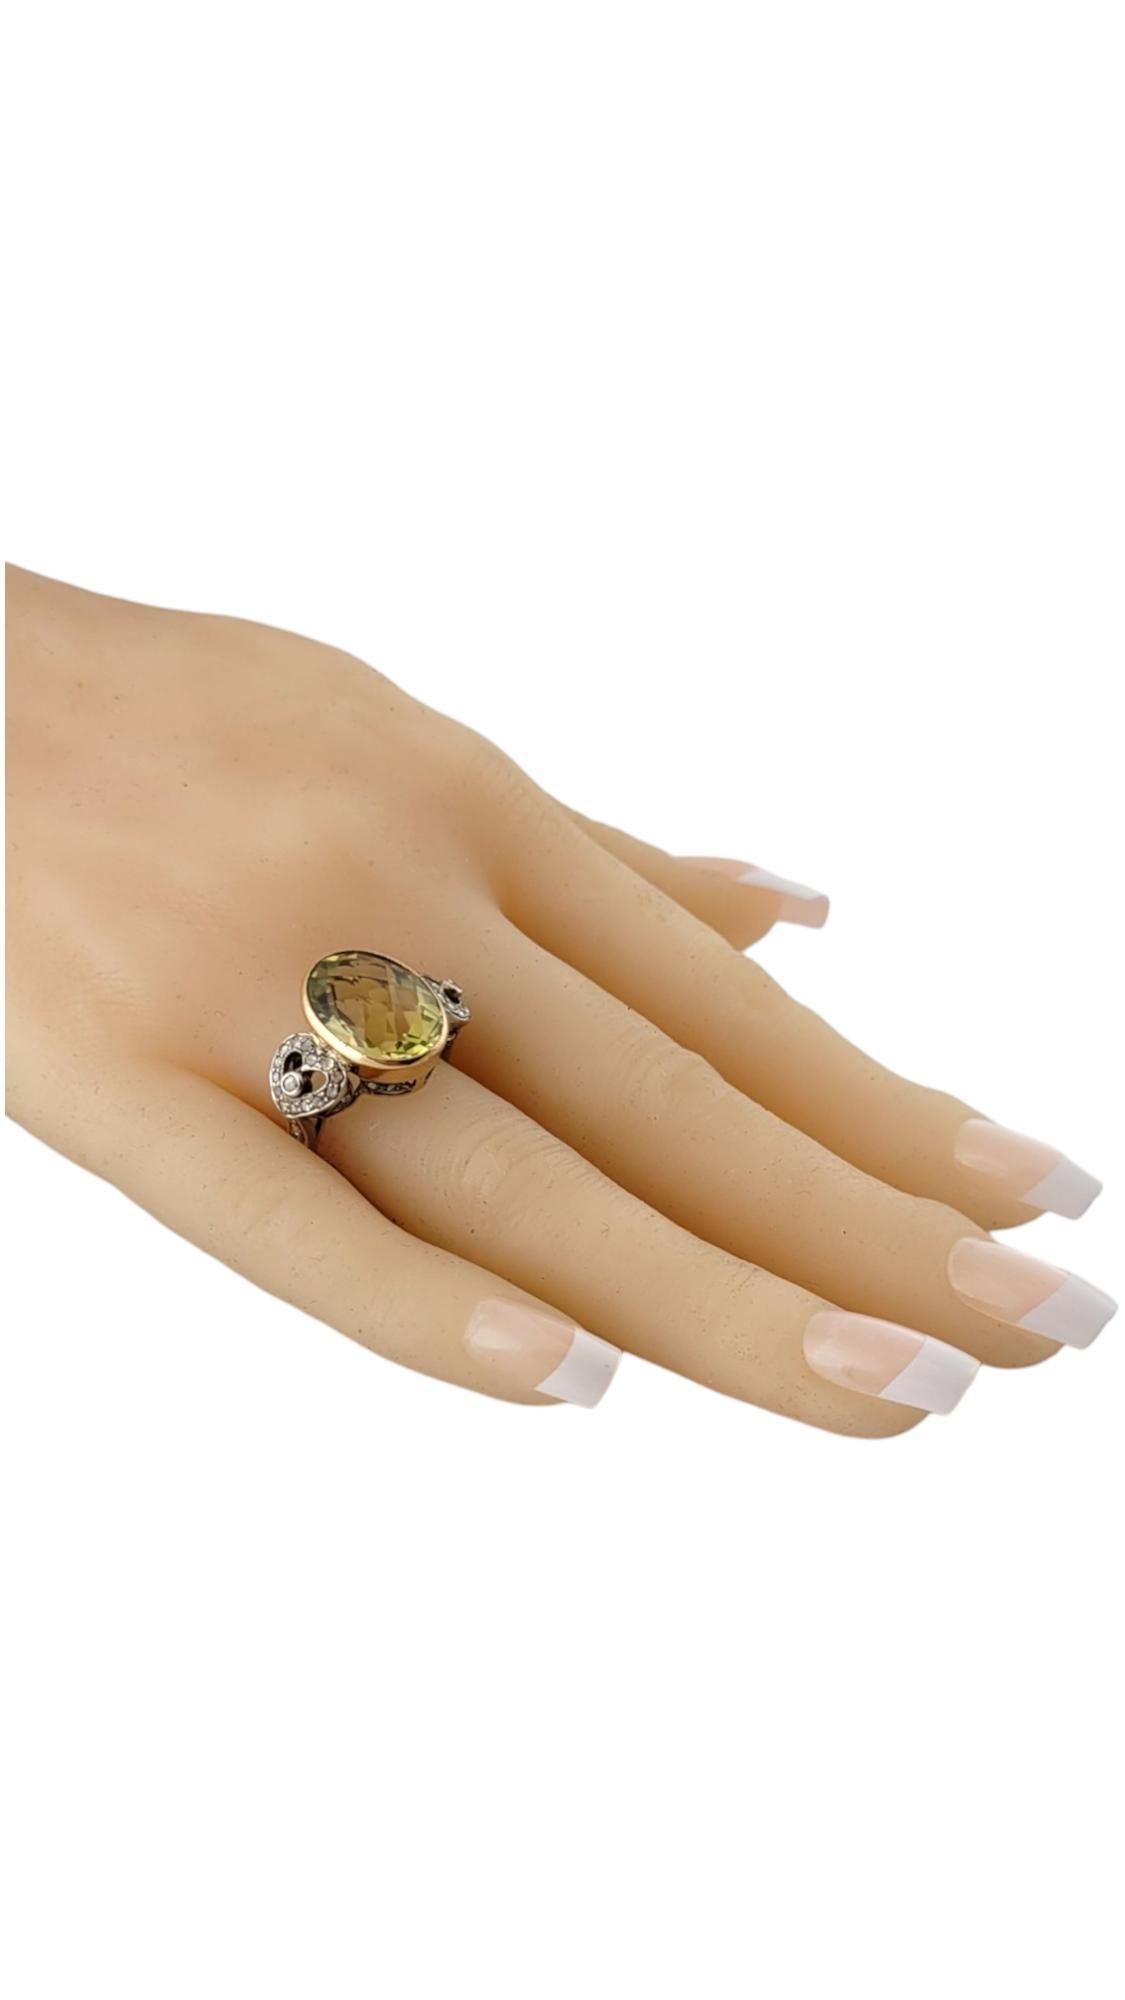 18K Two Tone Gold Oval Citrine Diamond Ring Size 6.75 #16452 For Sale 2